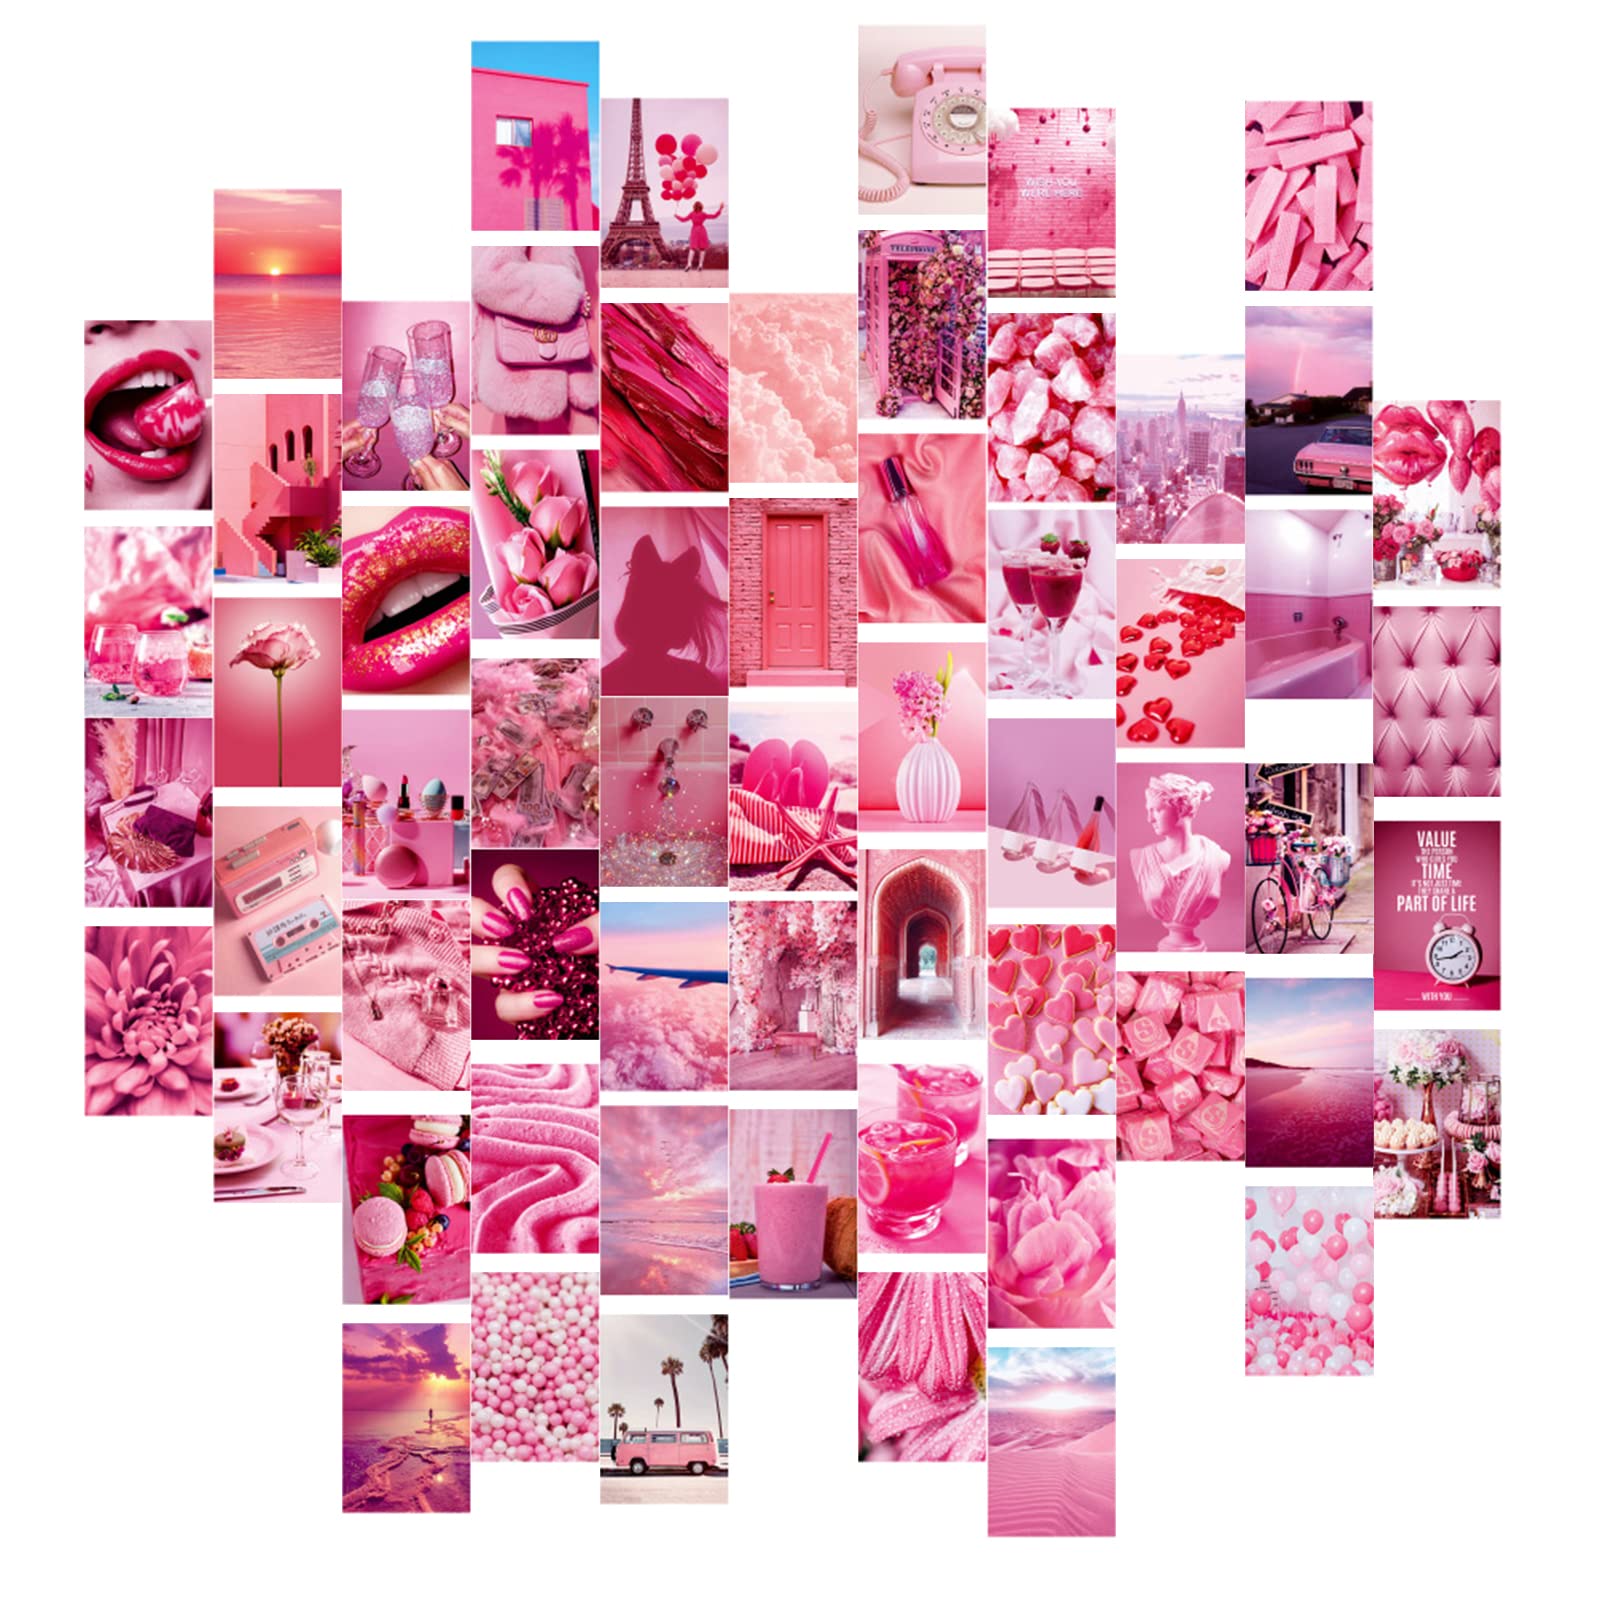 Seed Spring Wall Collage Kit Anesthetic Picture, 50 Pcs Double Sides Pink Posters for Wall Dorm Bedroom, Vintage Wall Art Photo for Girls, 4x6 Inch